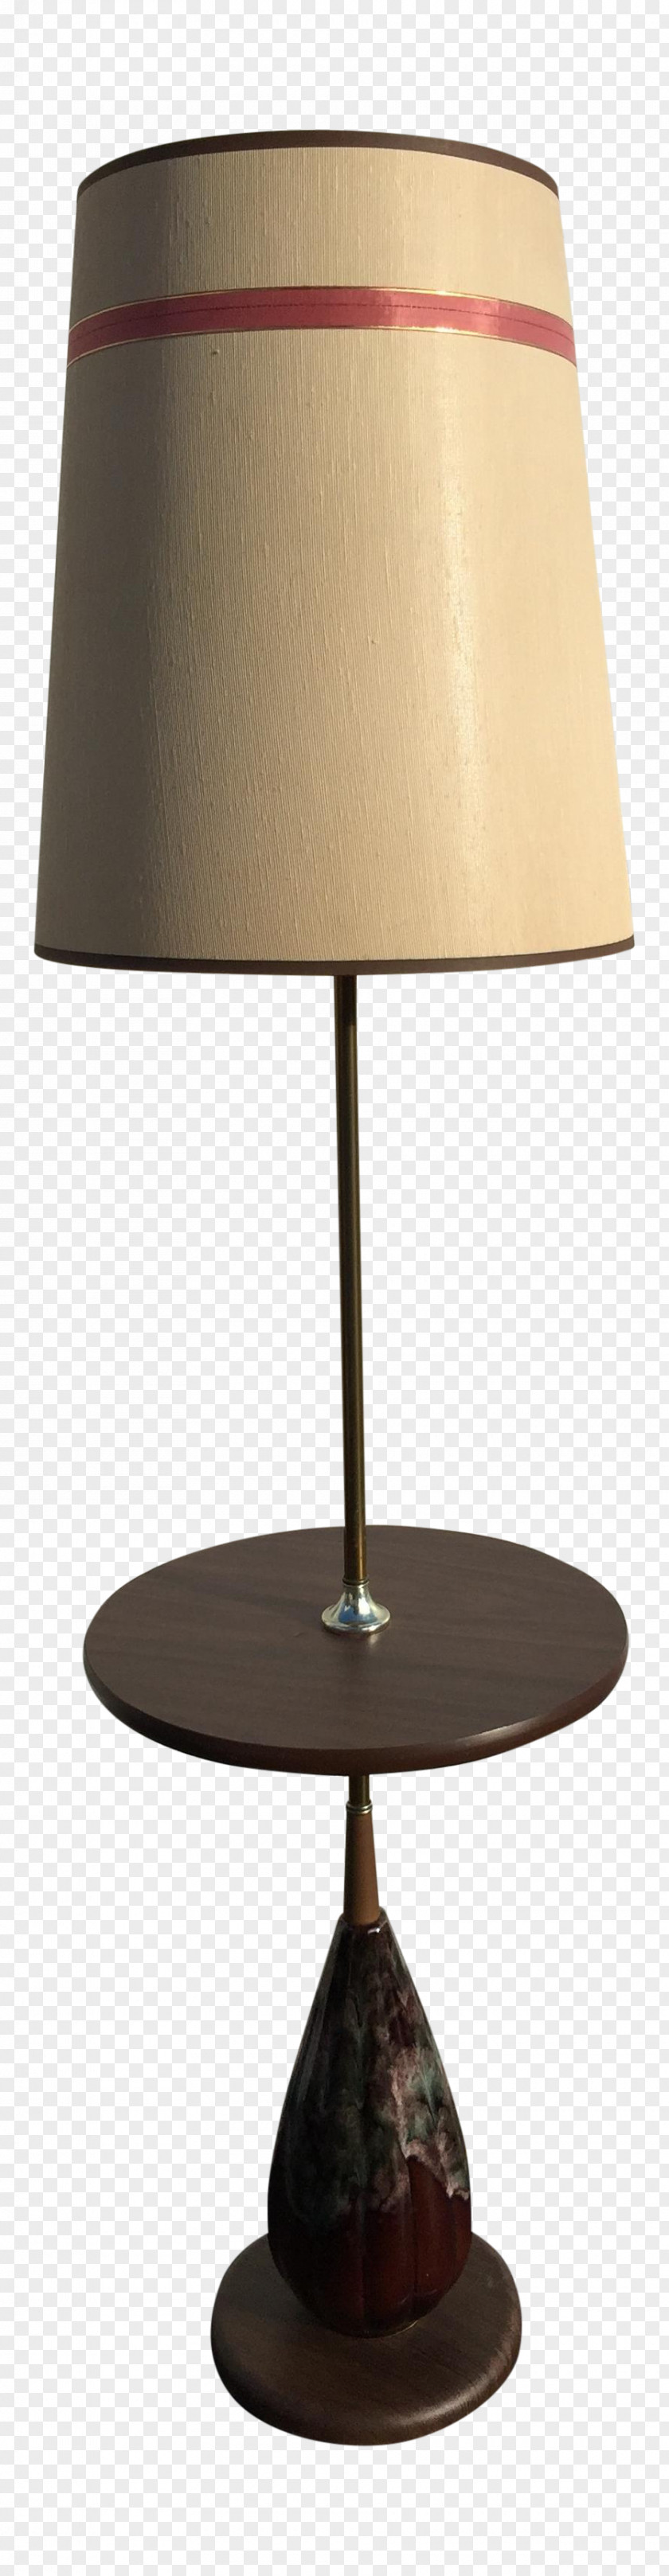 Chinese Style Retro Floor Lamp Shades Lava Electric Light PNG